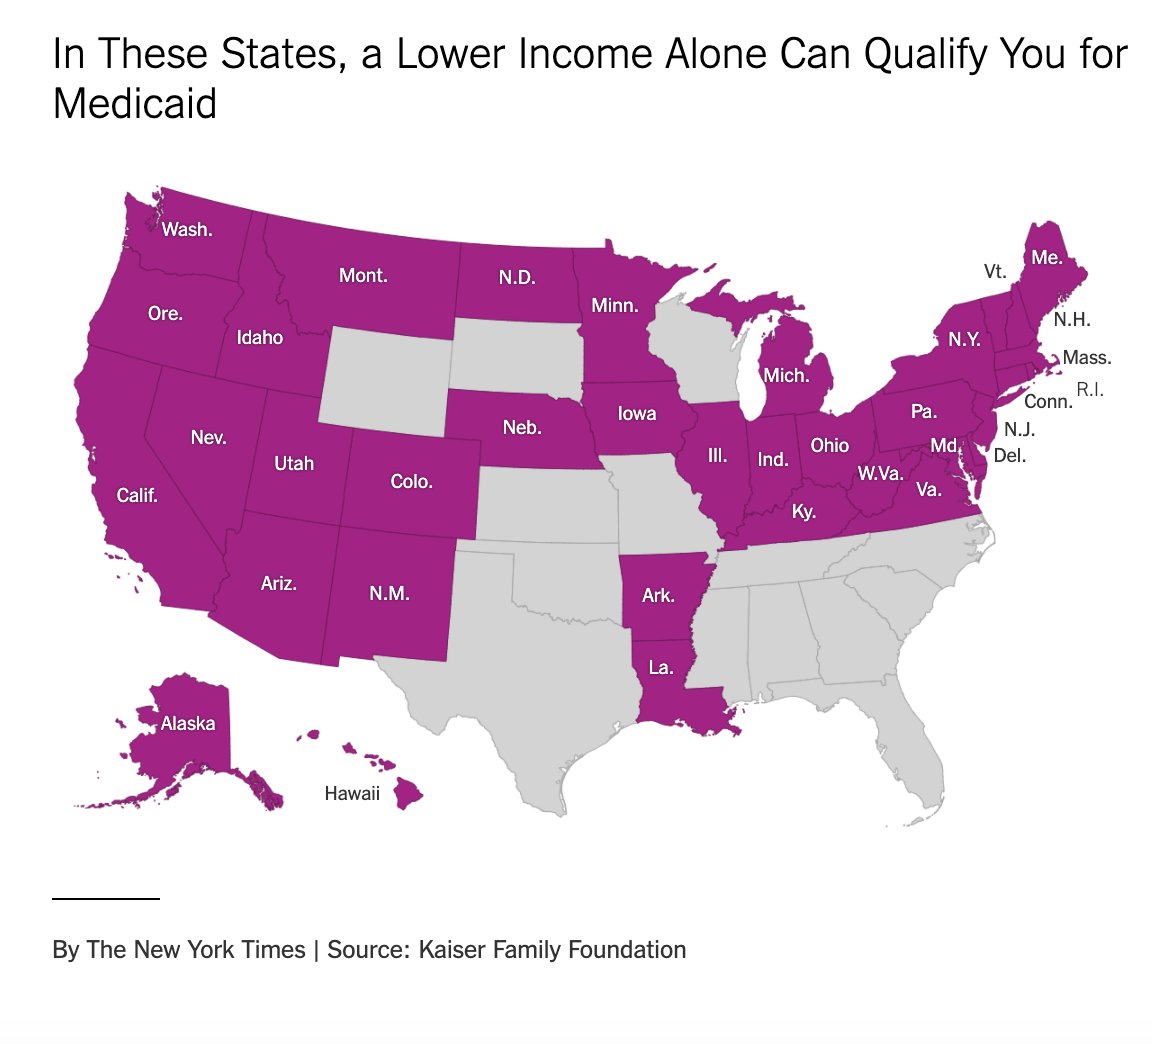 If your monthly income is below 133% of the poverty level--possible if you just lost your job--you can qualify for Medicaid in most (but not all) states. If you think that's you, your best bet is going right to your state's Medicaid enrollment site.